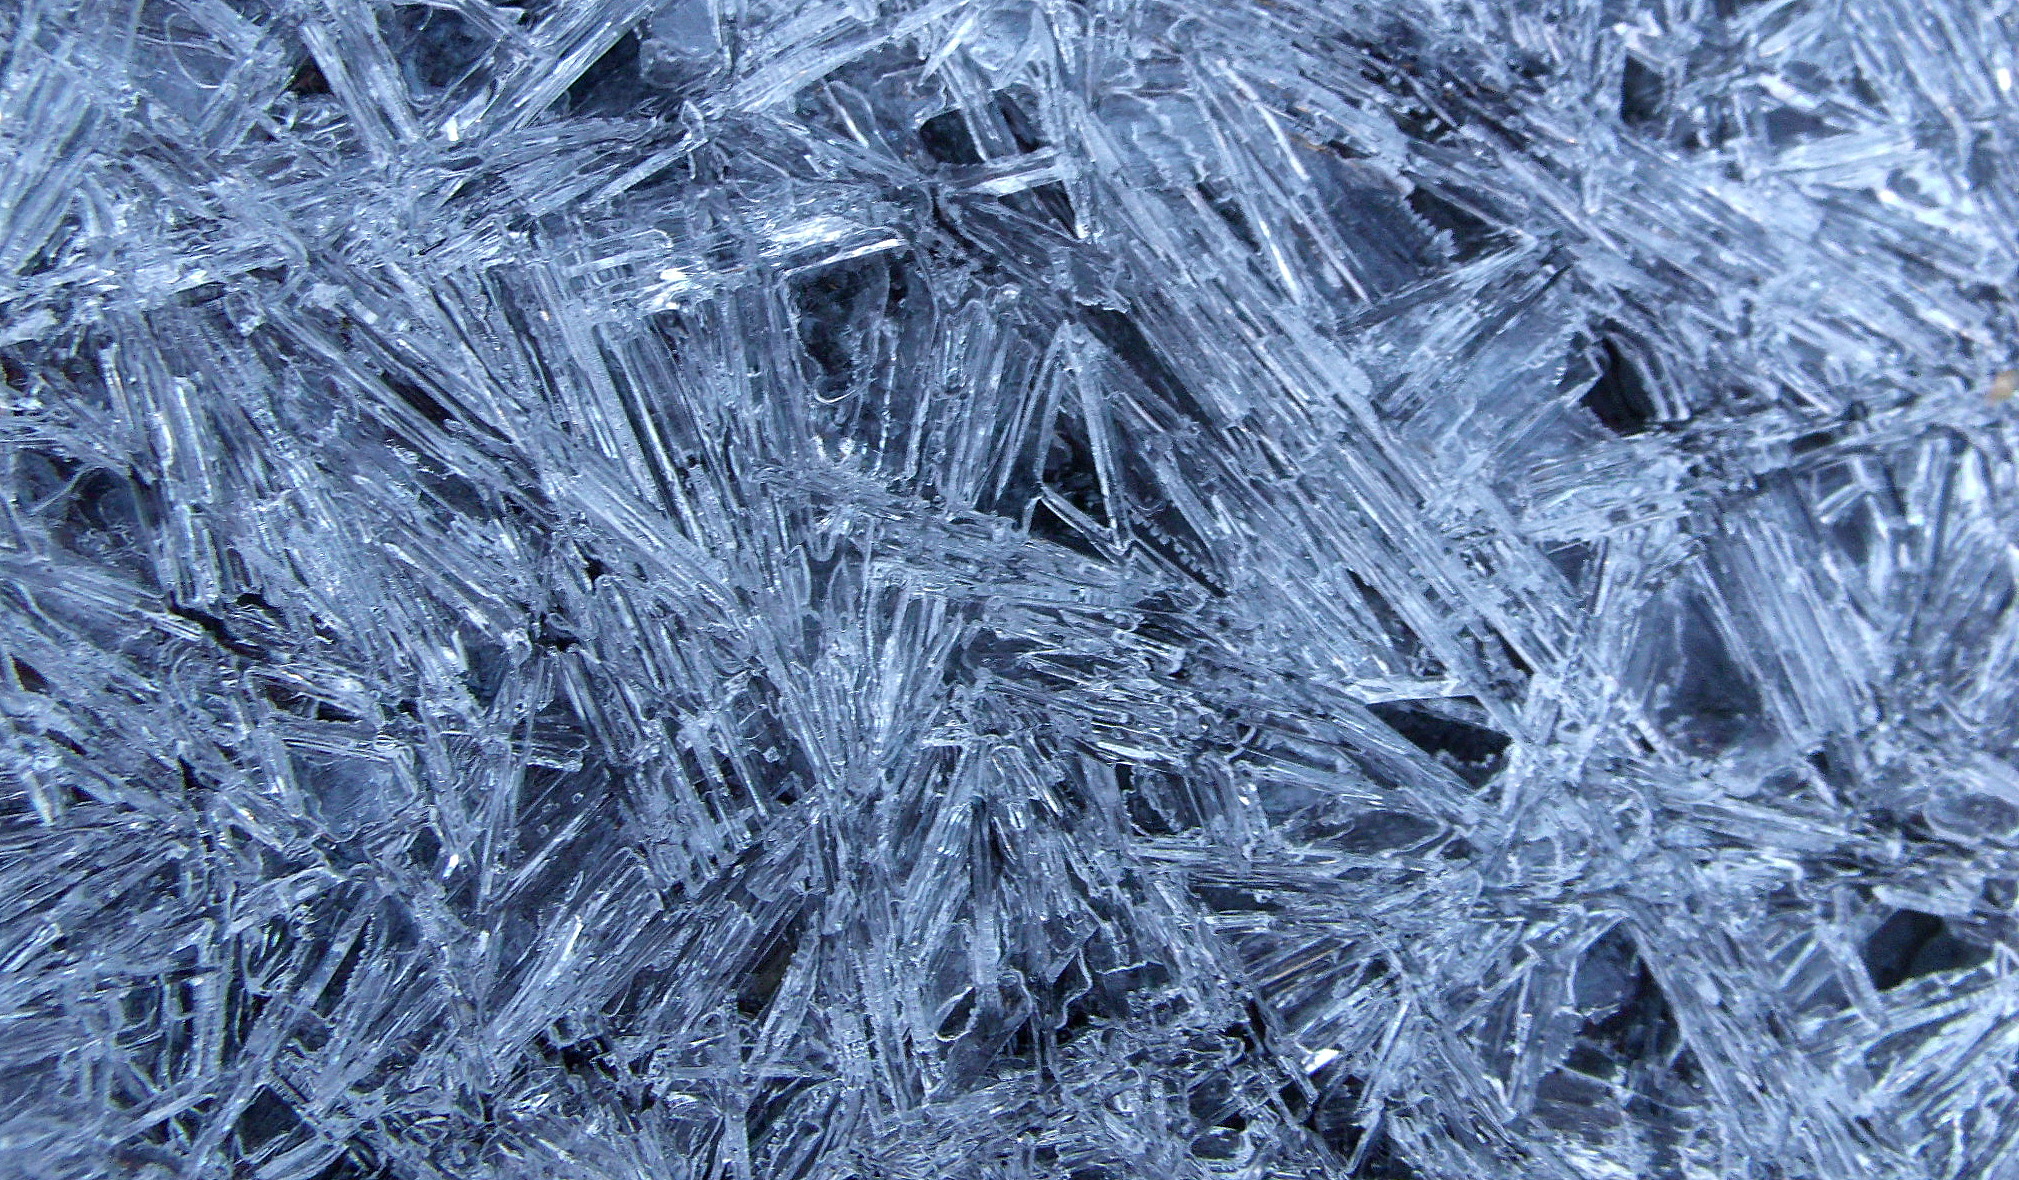 Ice crystals close-up | Scott's Place...Images and Words